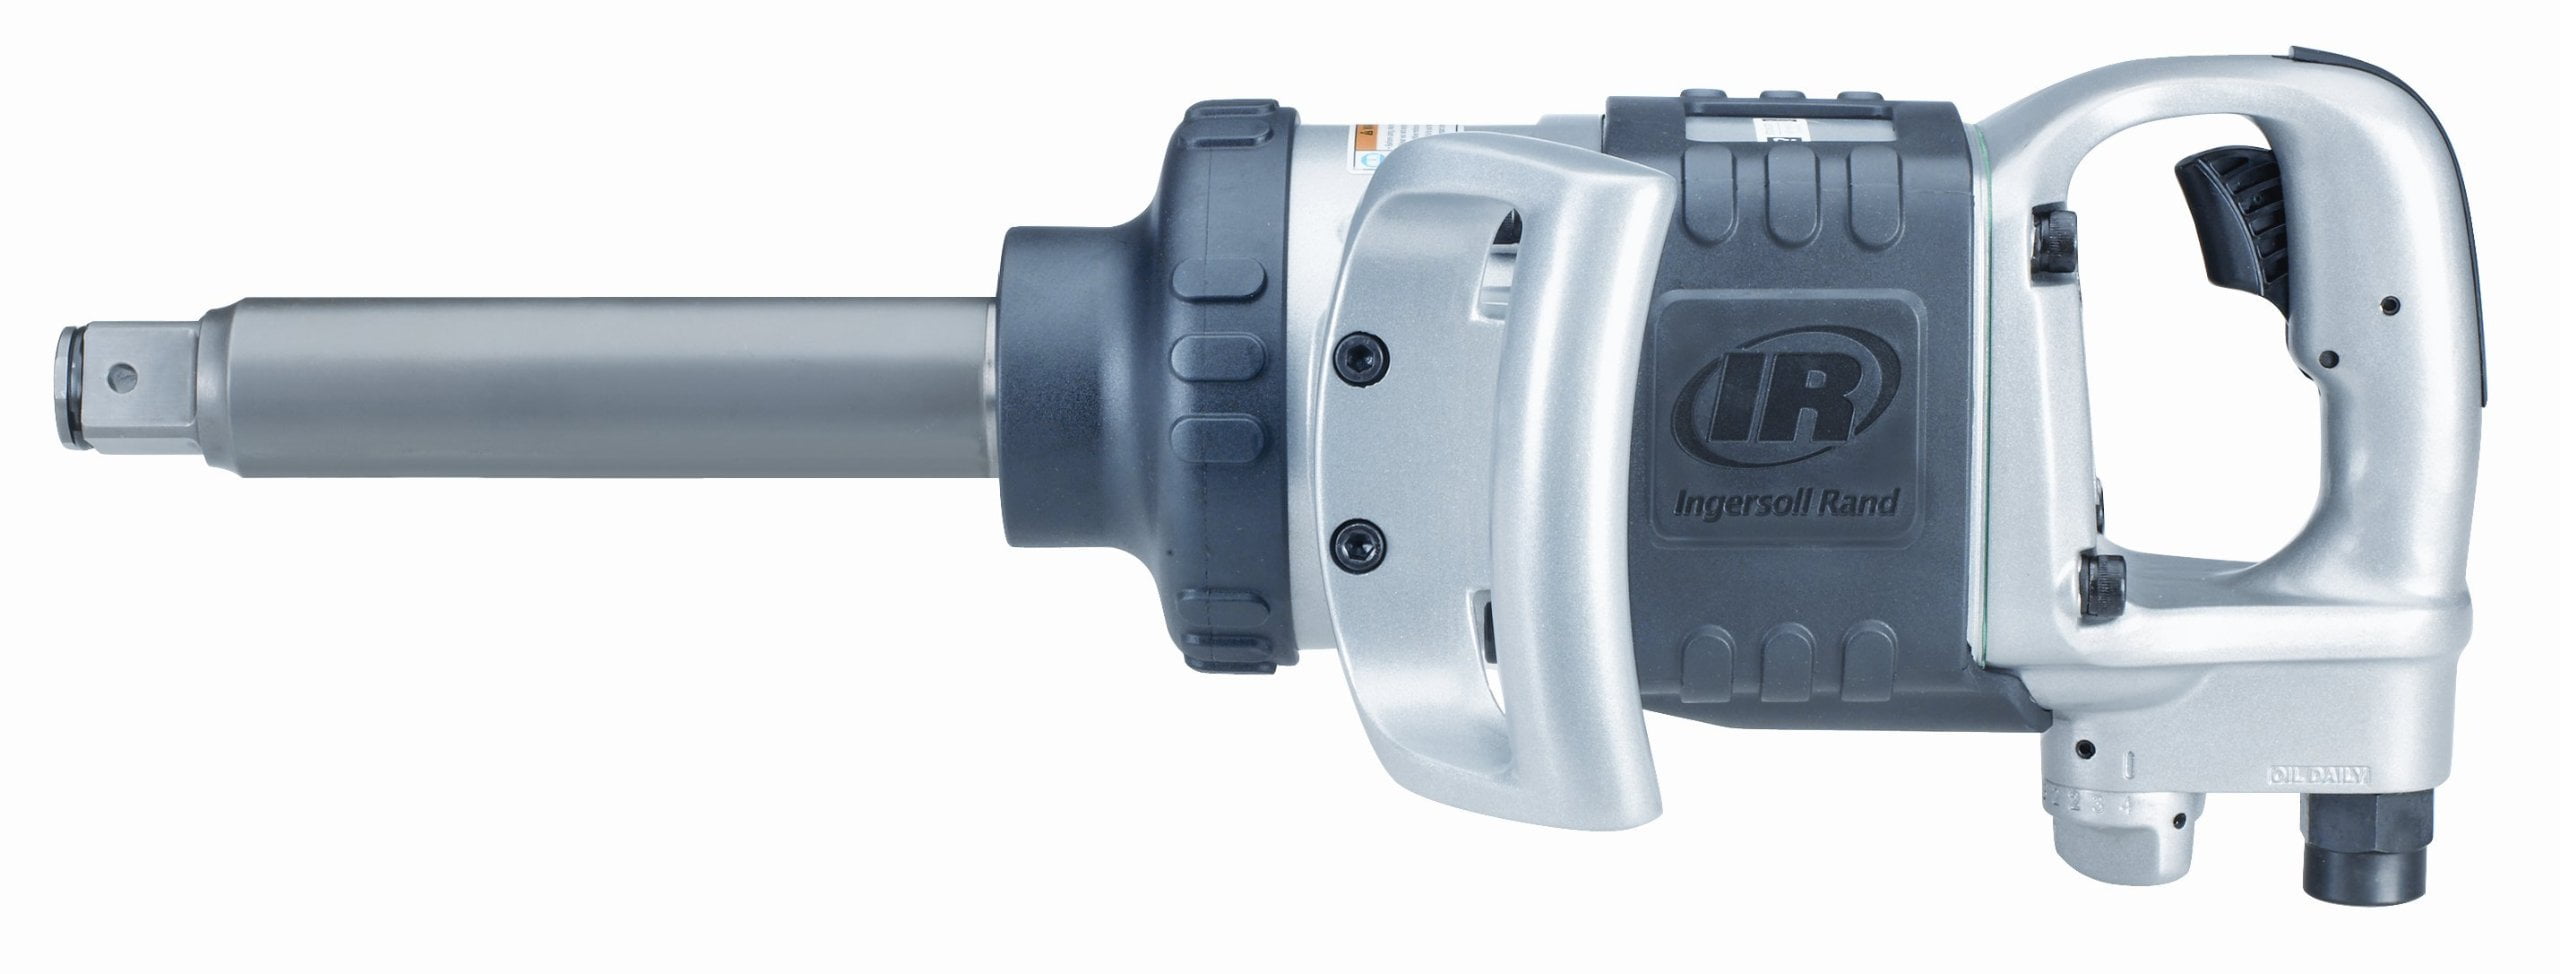 Ingersoll Rand 285B-6 Heavy Duty Pneumatic Impact Wrench with 6 